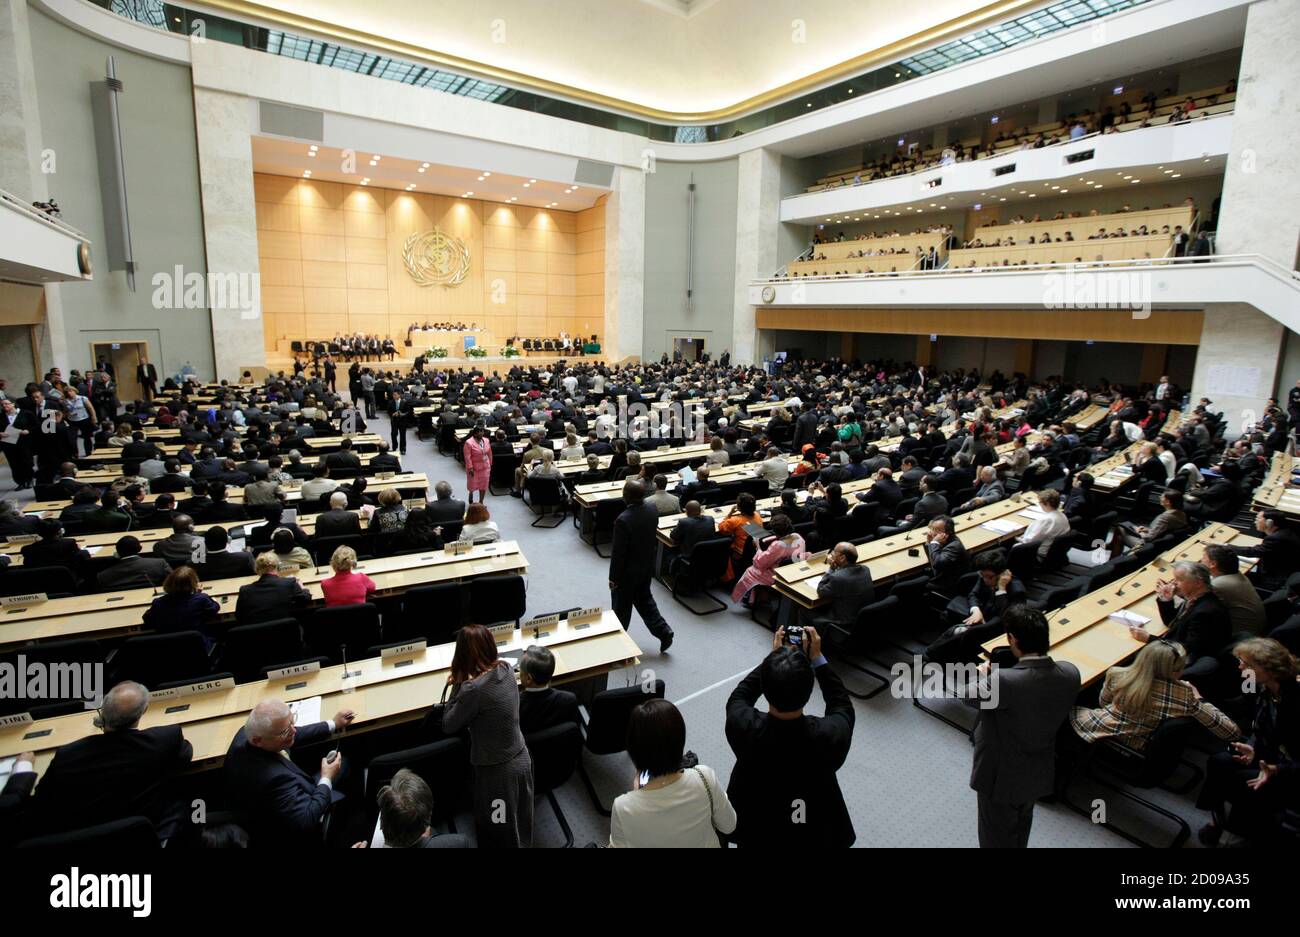 General view of the 64th World Health Assembly at the United Nations European headquarters in Geneva May 16, 2011. The World Health Assembly is the annual meeting of the World Health Organization's (WHO) 193 Member States and it is the supreme decision-making body of WHO which sets the policy for the Organization and approves the budget.  REUTERS/Denis Balibouse (SWITZERLAND - Tags: HEALTH POLITICS) Stock Photo